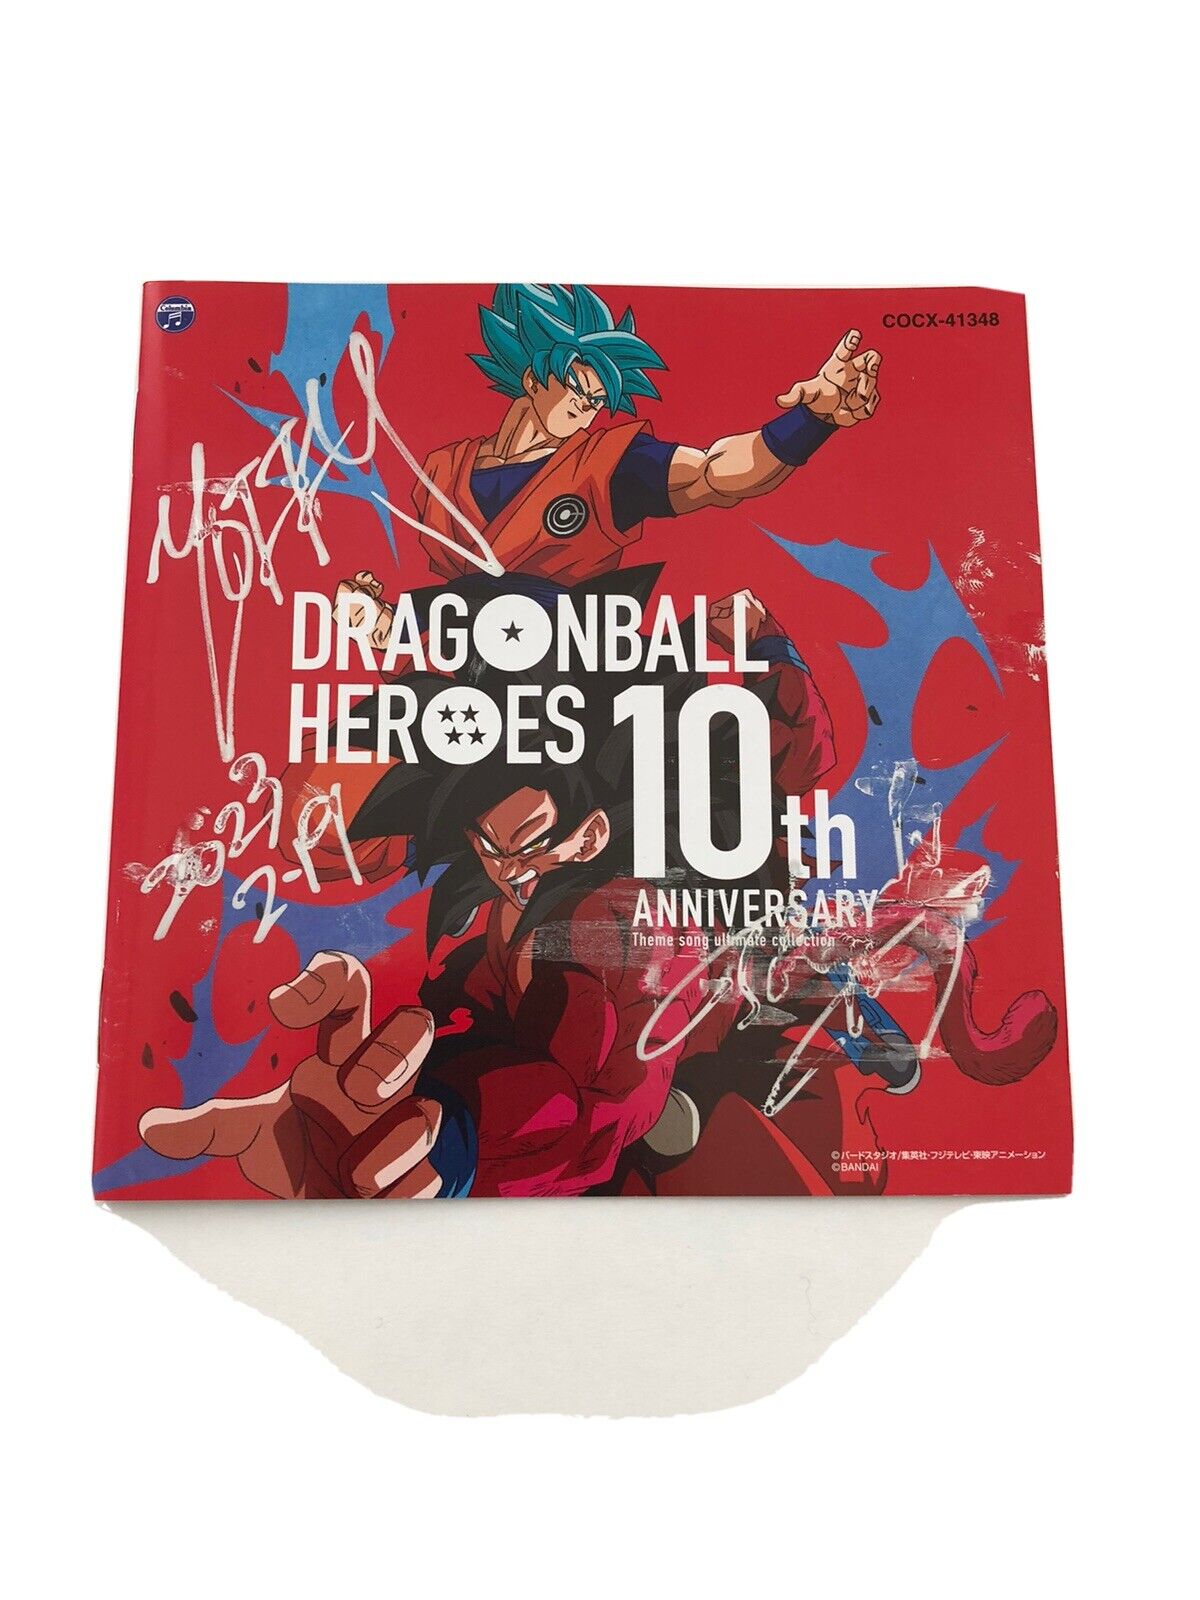 Dragon ball Heroes 10th anniversary CD with heroe avatar card from Japan